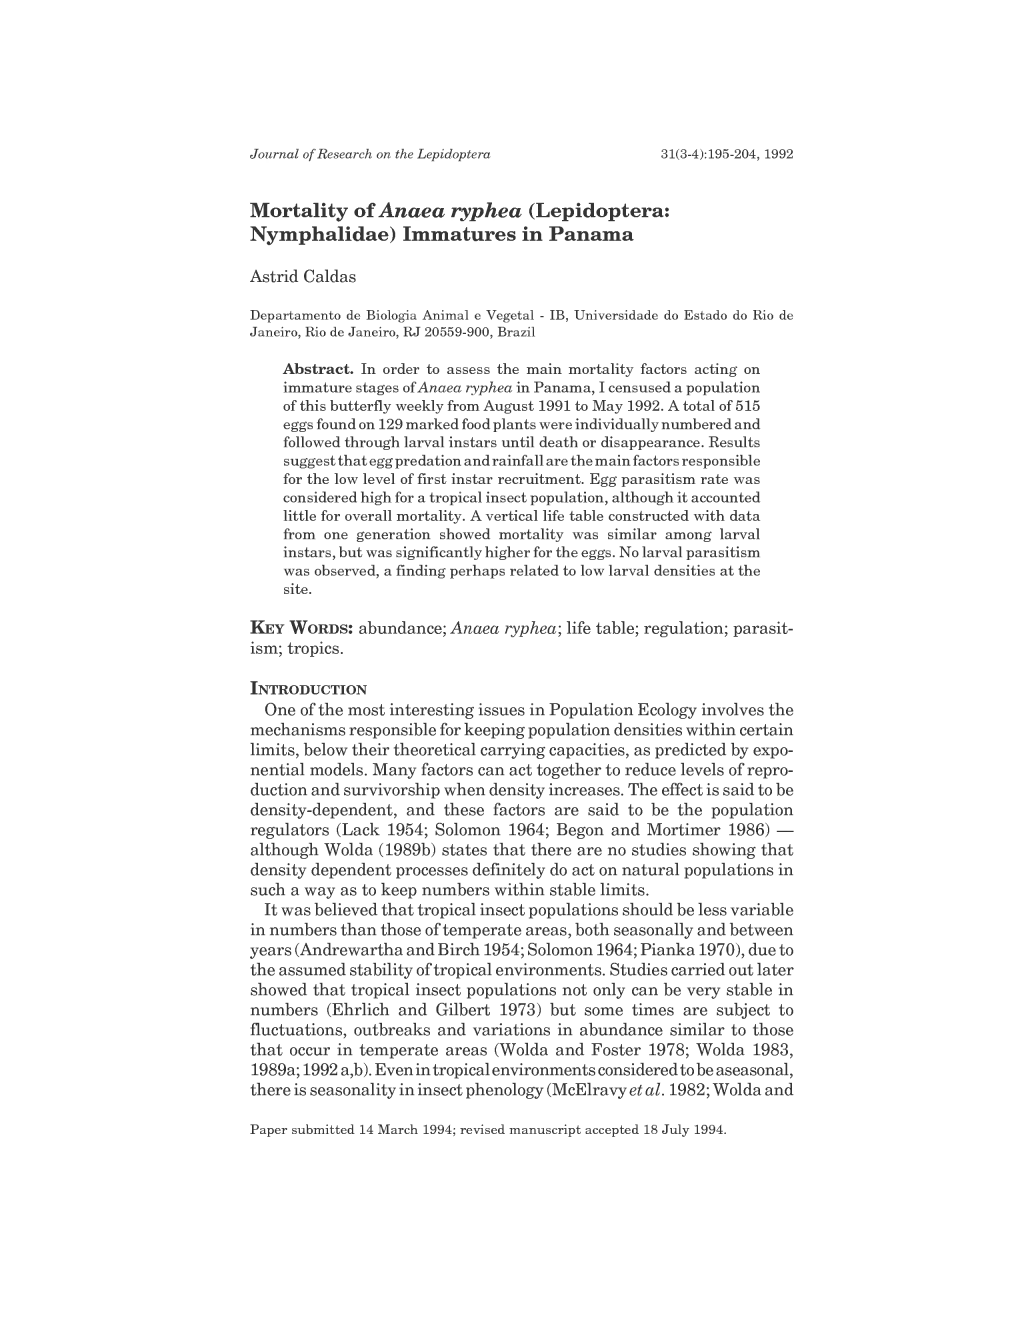 Mortality of Anaea Ryphea (Lepidoptera: Nymphalidae) Immatures in Panama